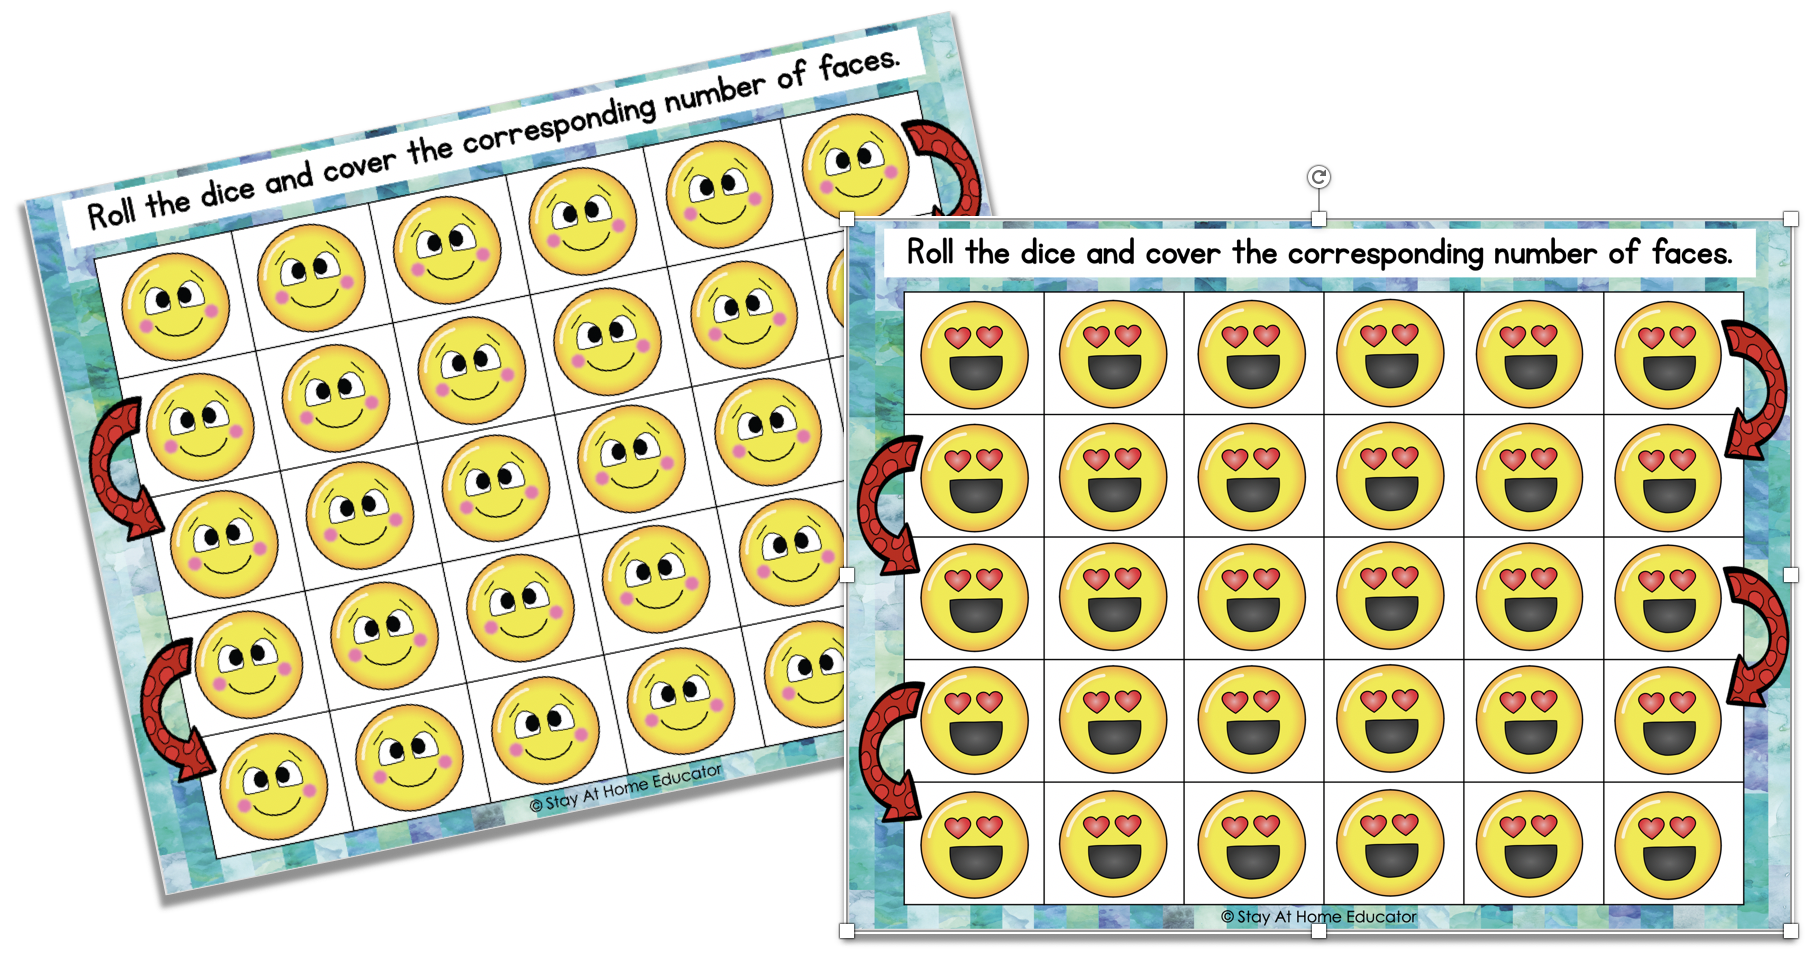 Students can identify feelings with these emoji games. Teach feelings and emotions to preschoolers using thee emoji games.  These are grid games for math and teach one to one correspondence and counting to preschoolers, too.